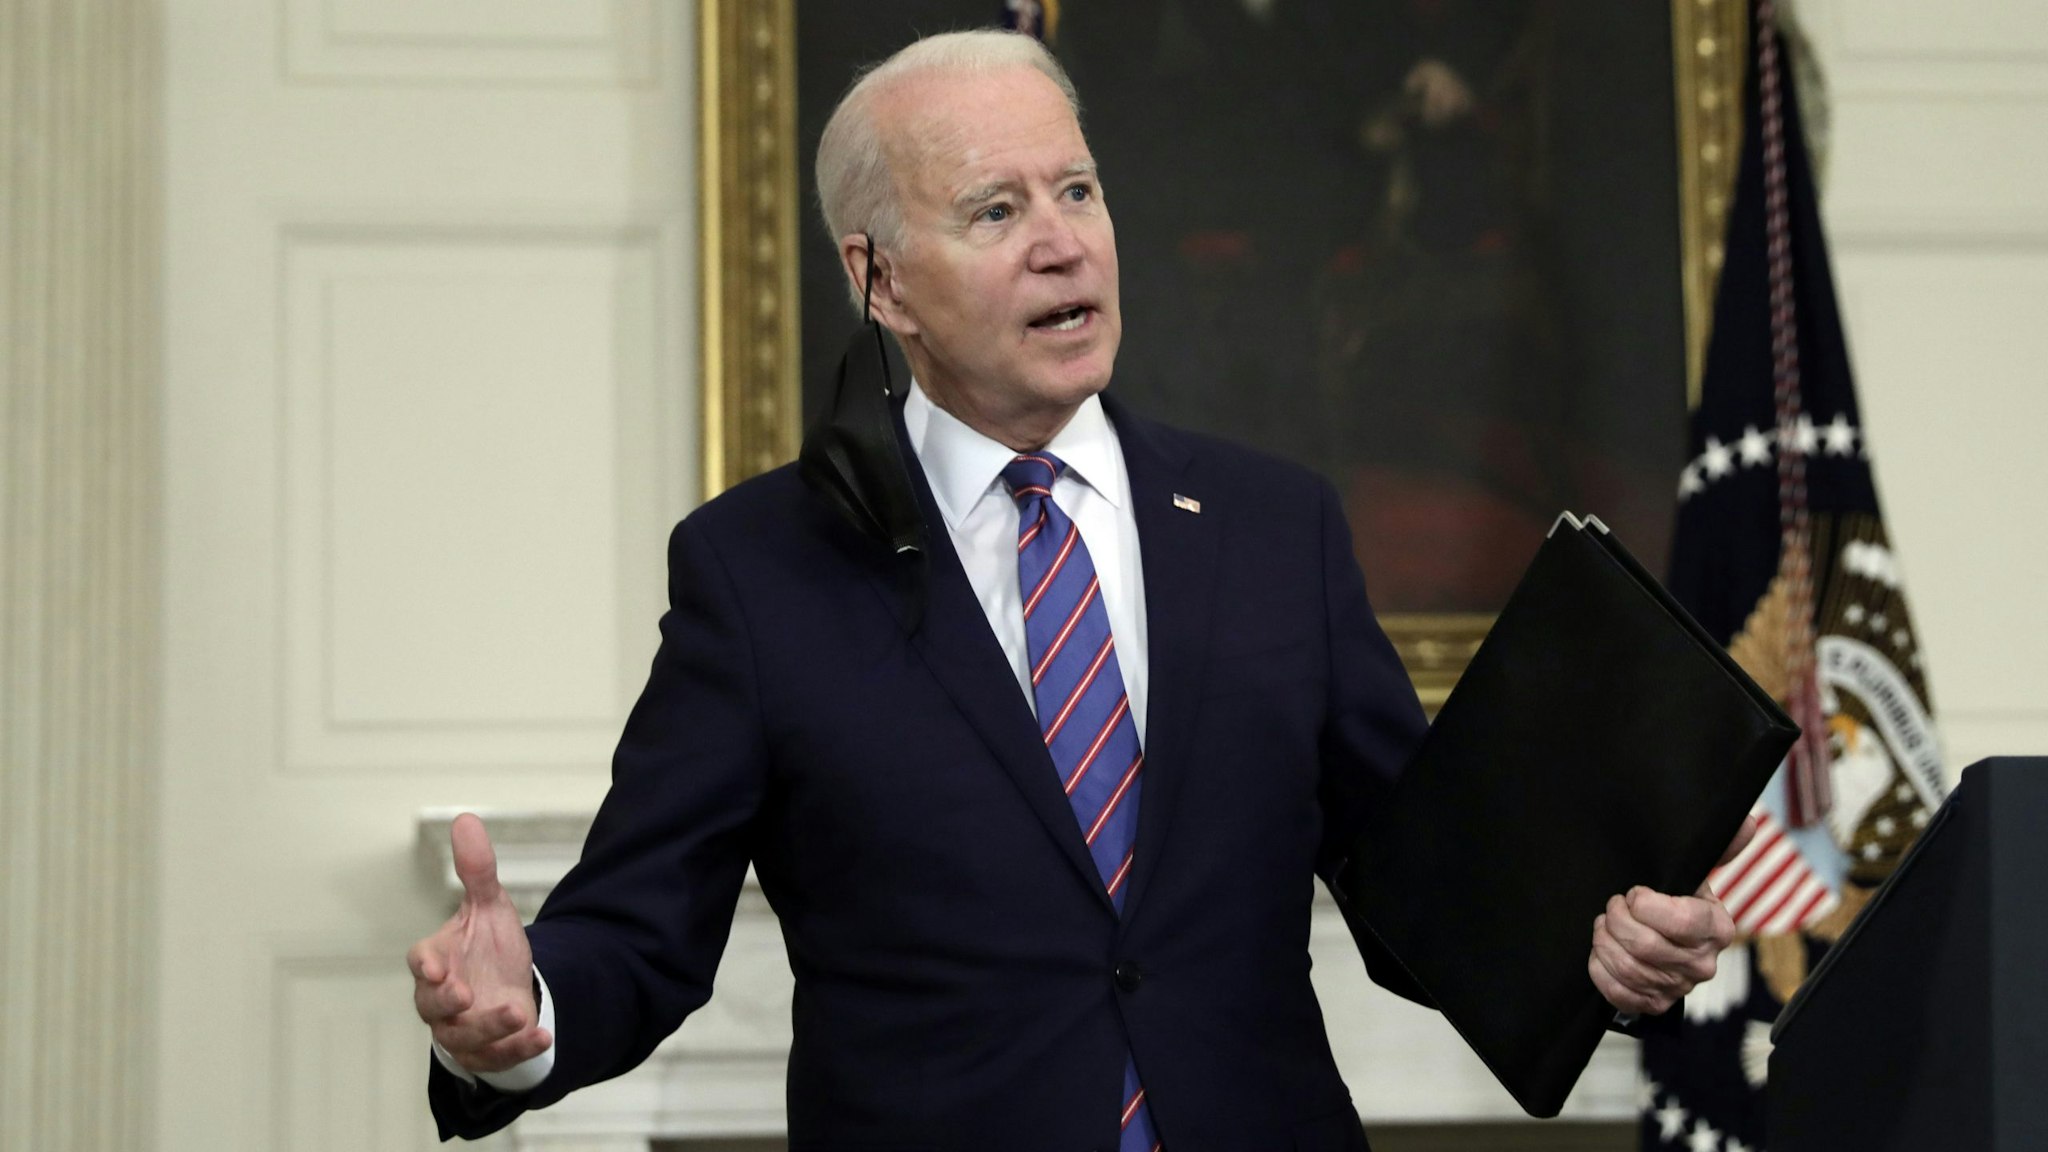 U.S. President Joe Biden answers a question from a member of the media after speaking in the State Dining Room of the White House in Washington, D.C., U.S., on Friday, April 2, 2021. U.S. employers added the most jobs in seven months with improvement across most industries in March, as more vaccinations and fewer business restrictions supercharged the labor market recovery.